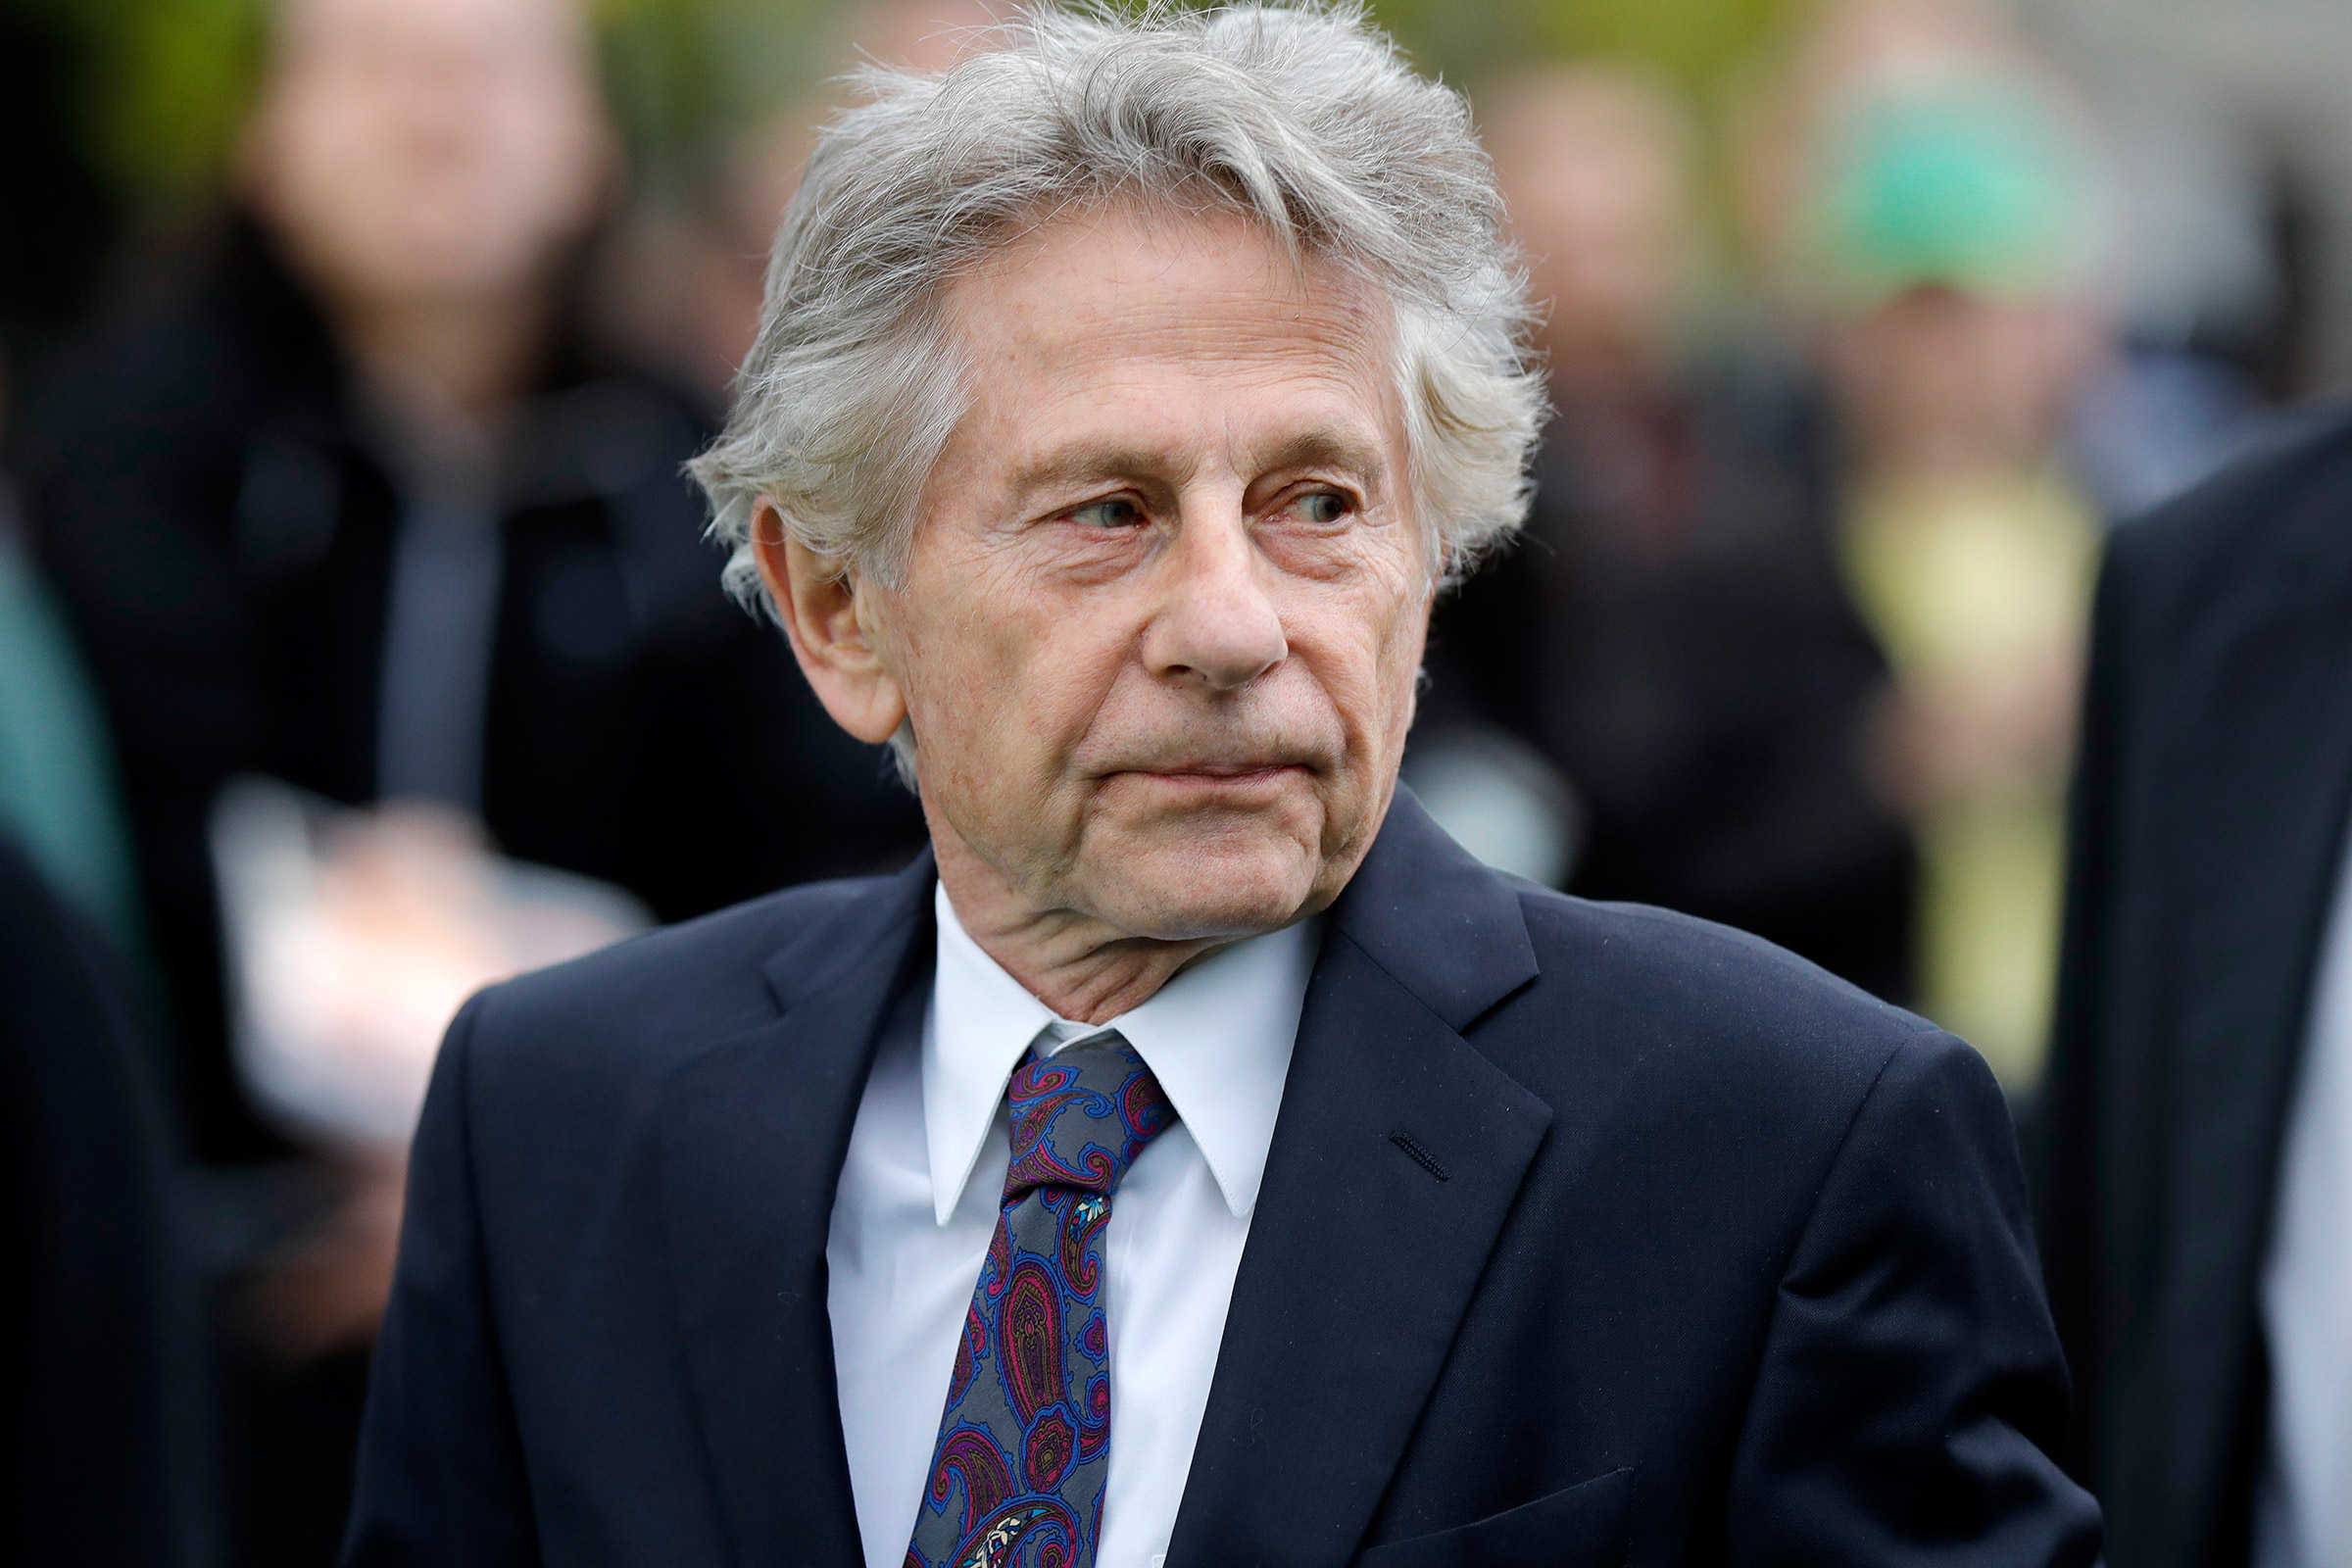 Roman Polanski accused of raping French actress in 1975